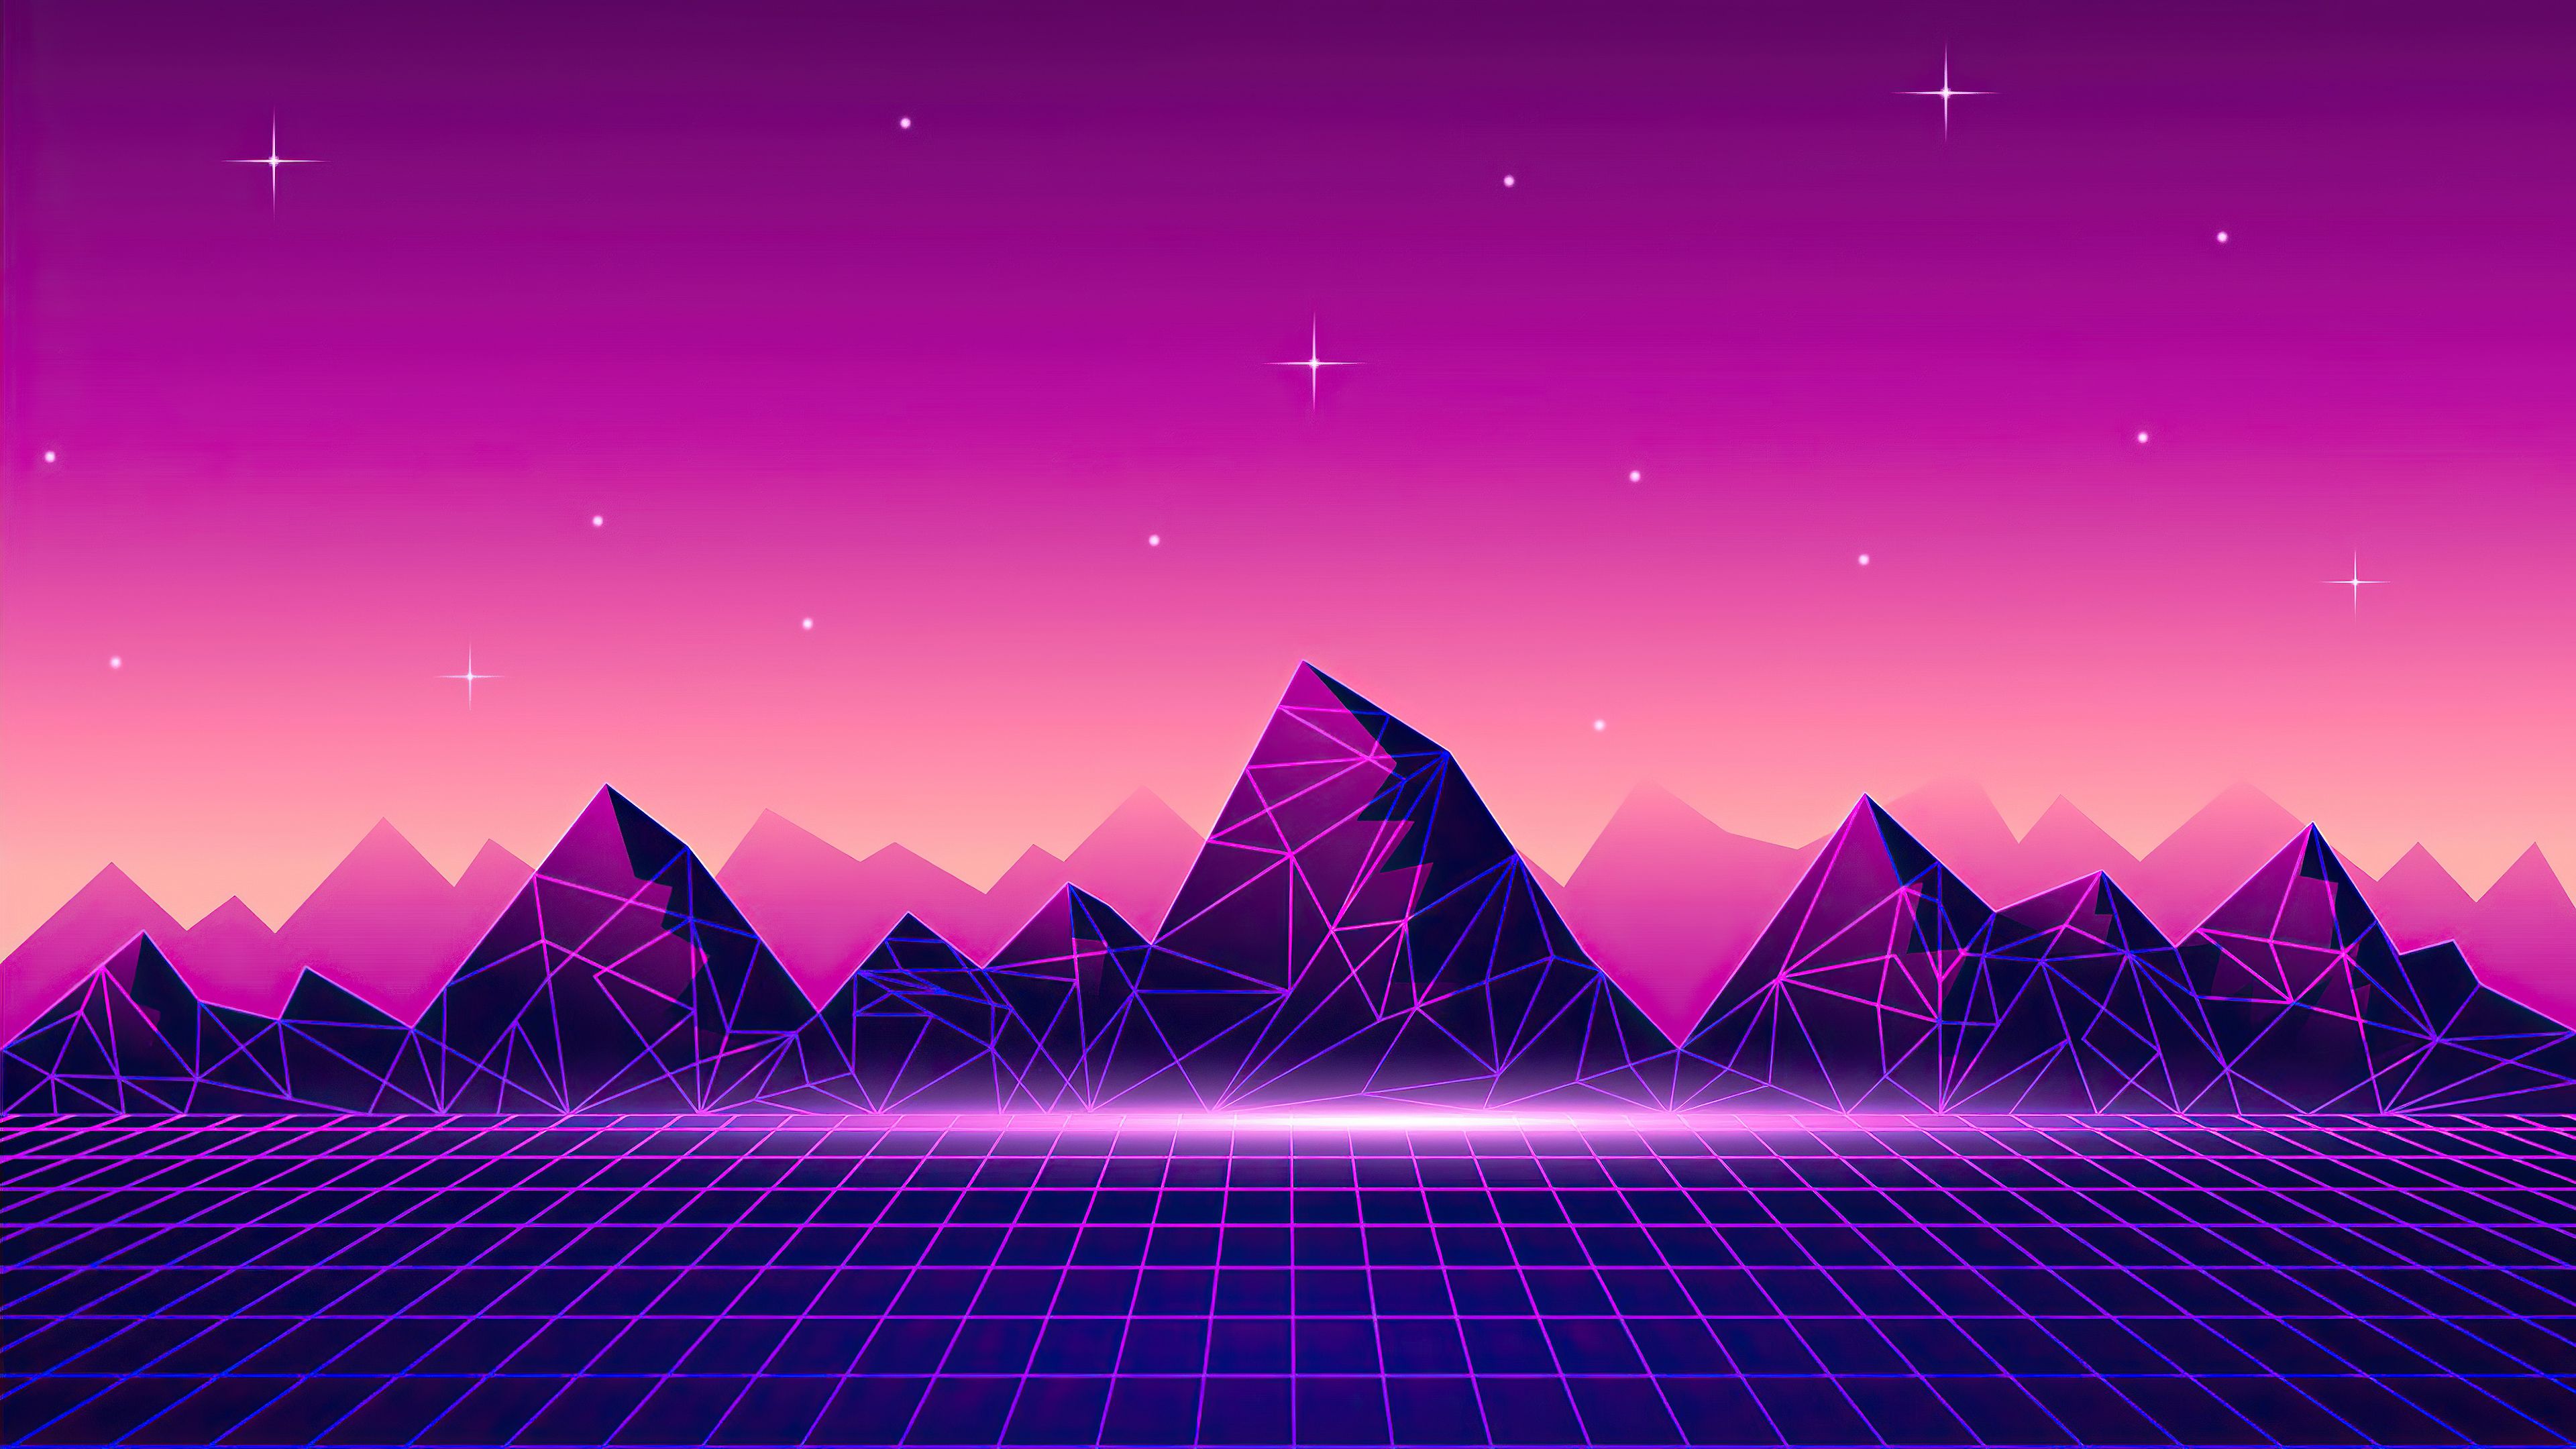 Synthwave Pyramid 4k, HD Artist, 4k Wallpaper, Image, Background, Photo and Picture